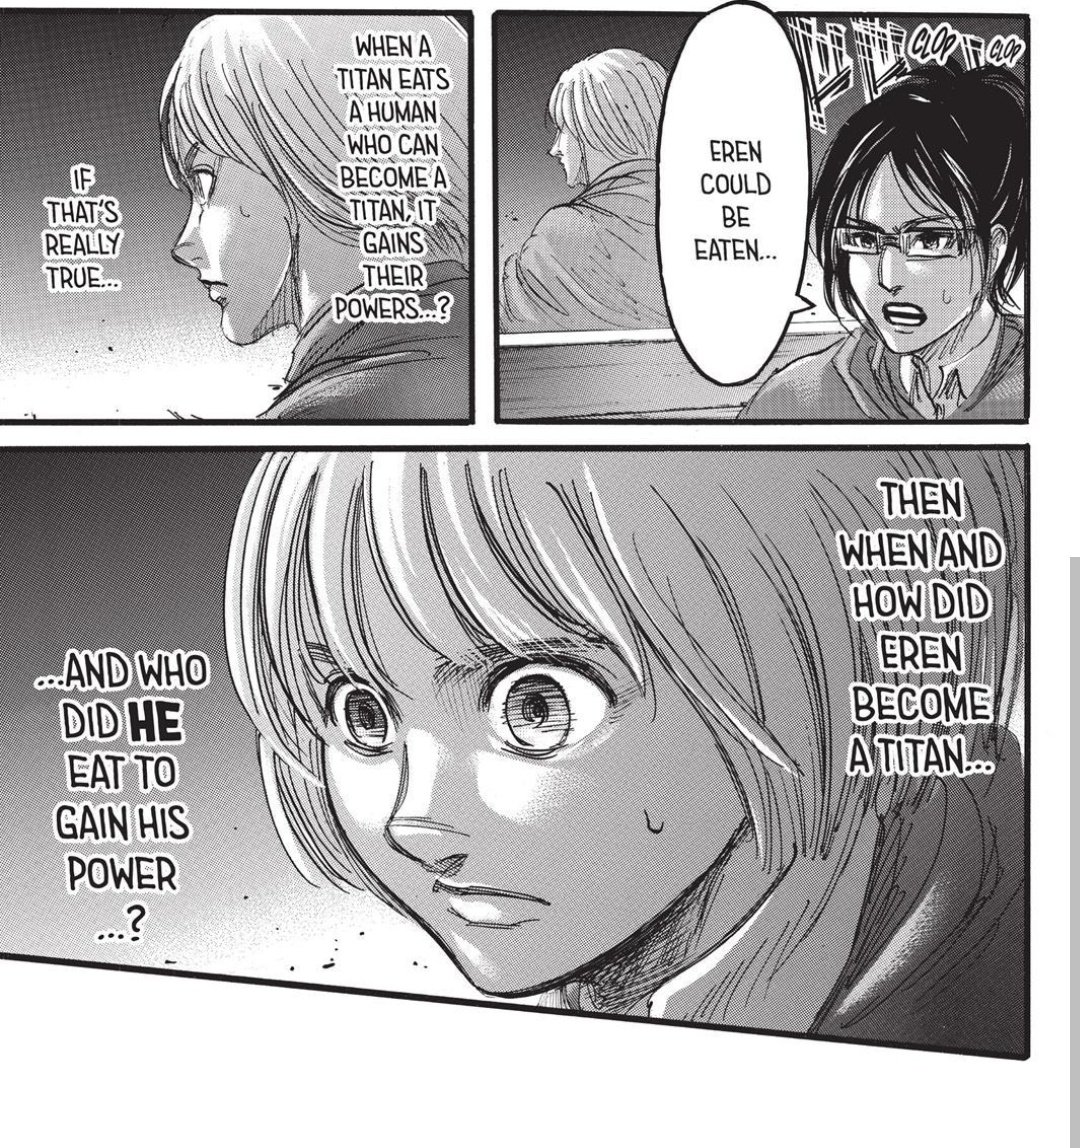 But... Eren wasn't a titan...Unless humans who eat titan shifters can also steal their powers, in which case it does make sense that Rod isn't a titan...